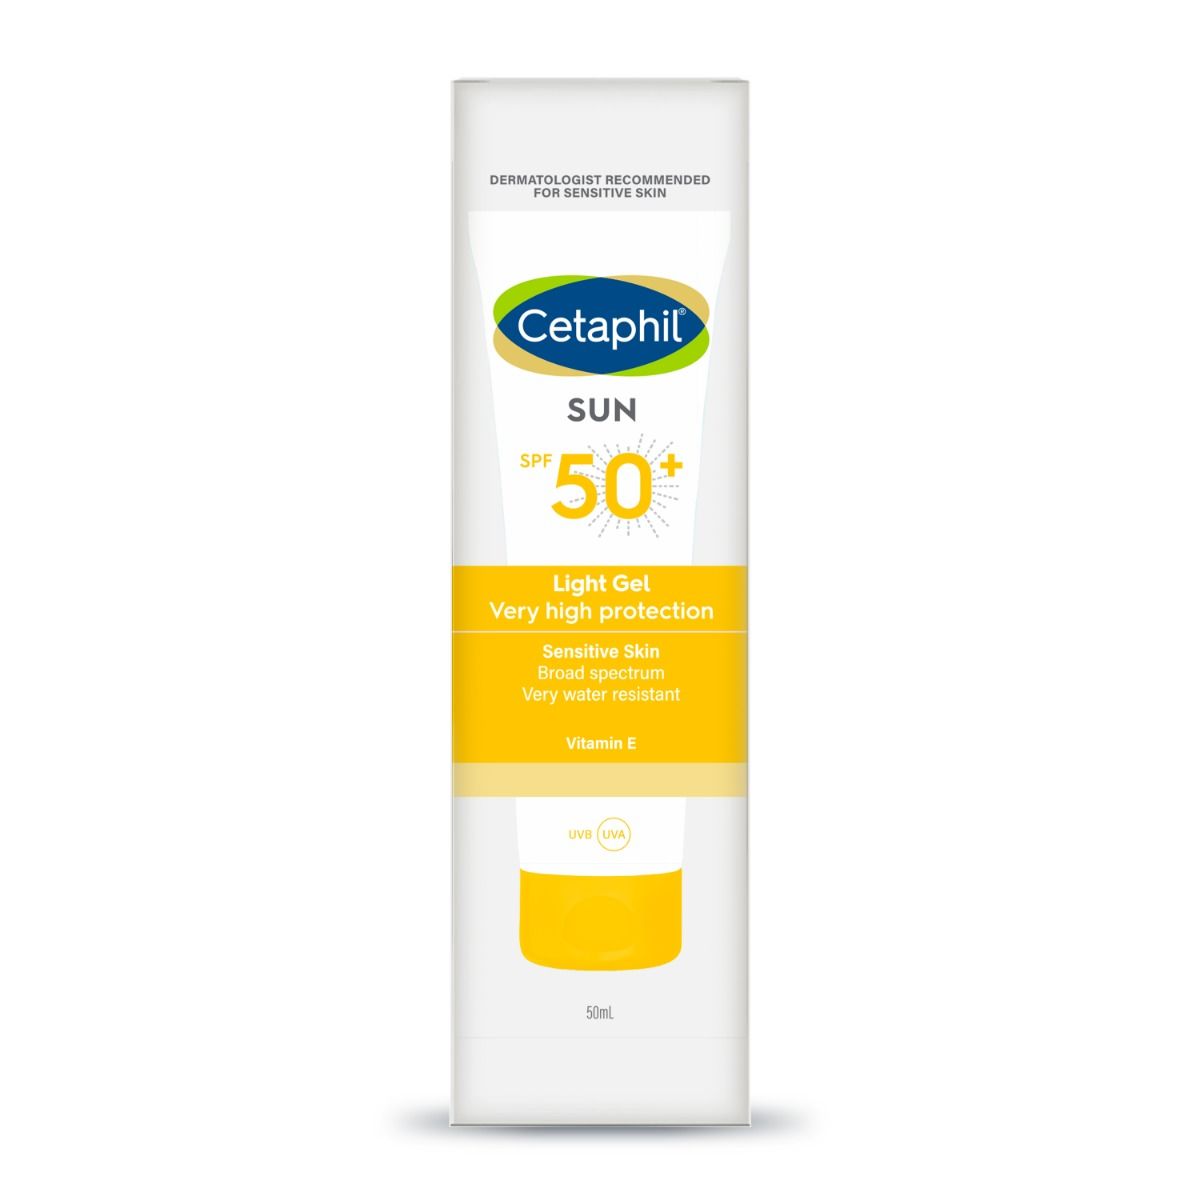 Cetaphil Sun SPF 50+ Very High Protection Light Gel, 50 ml, Pack of 1 